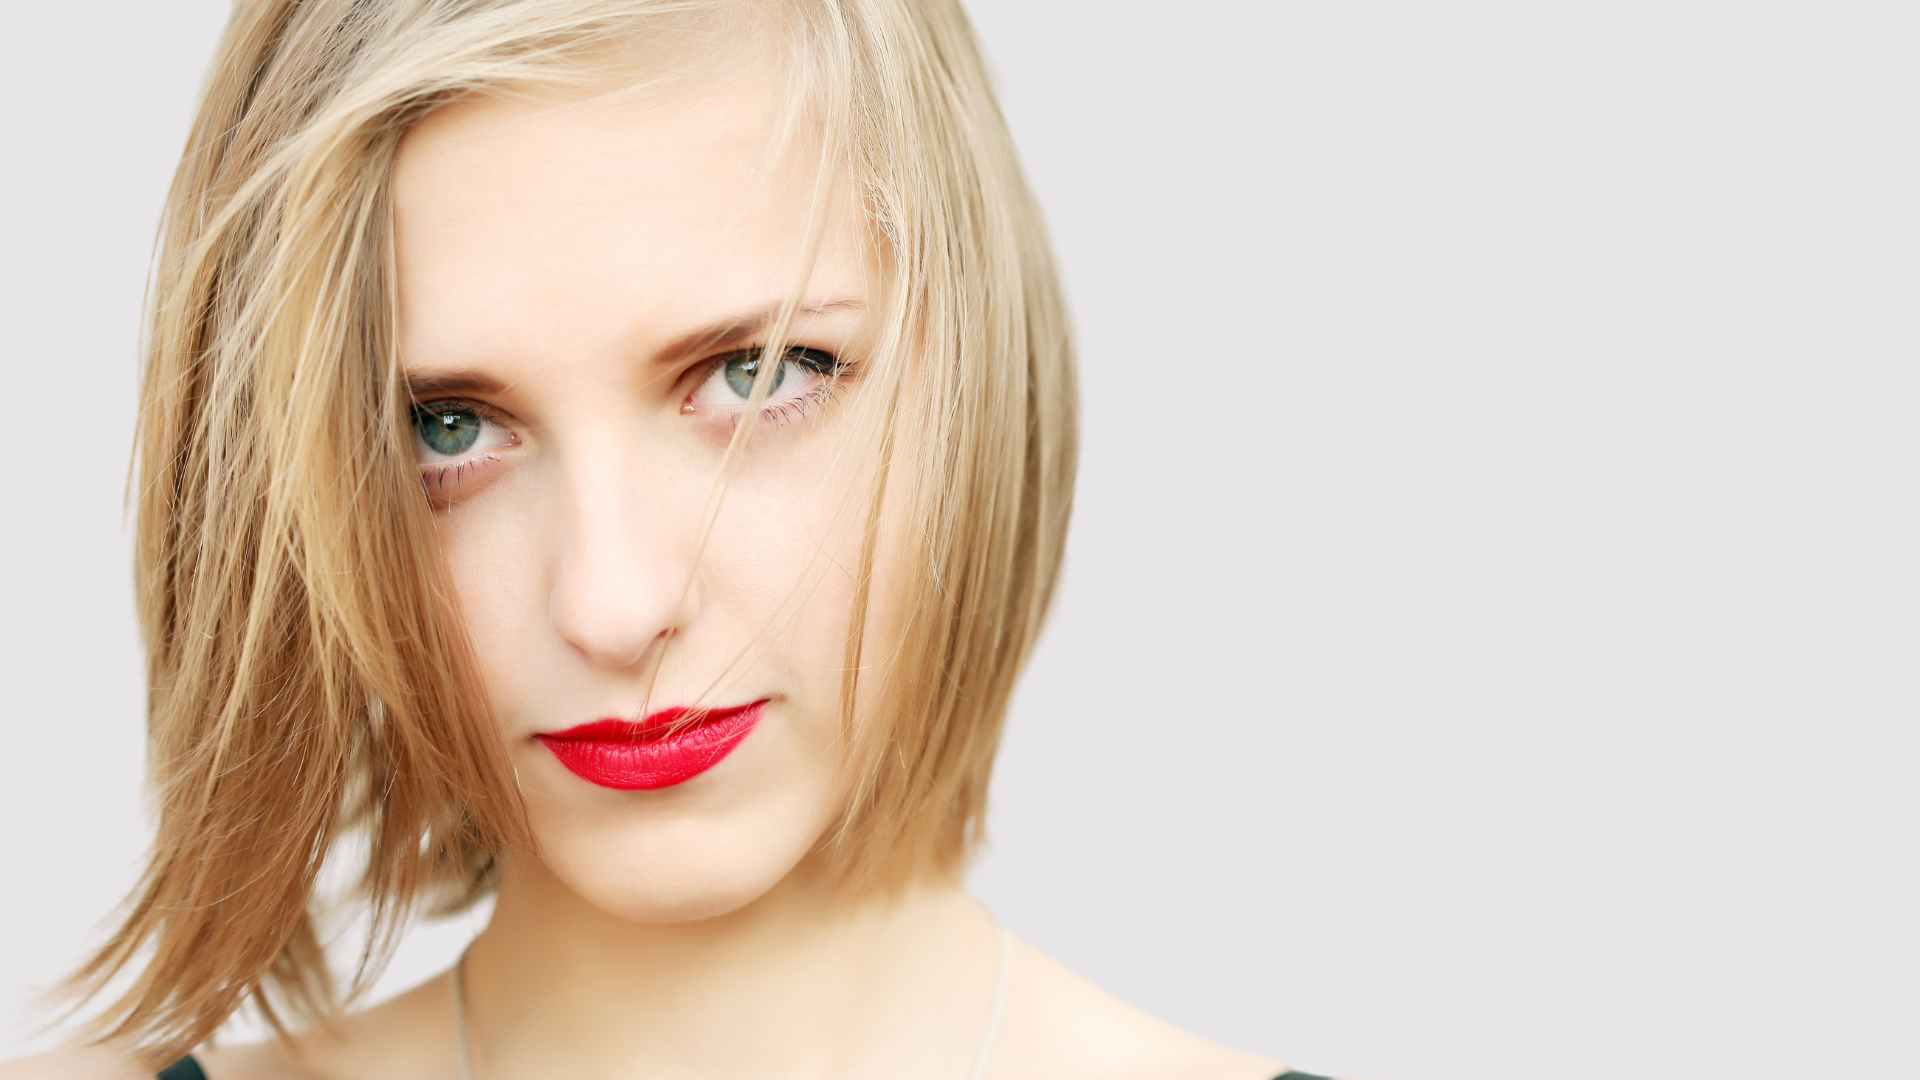 blonde female with fine hair, wearing red lipstick looking directly at the camera